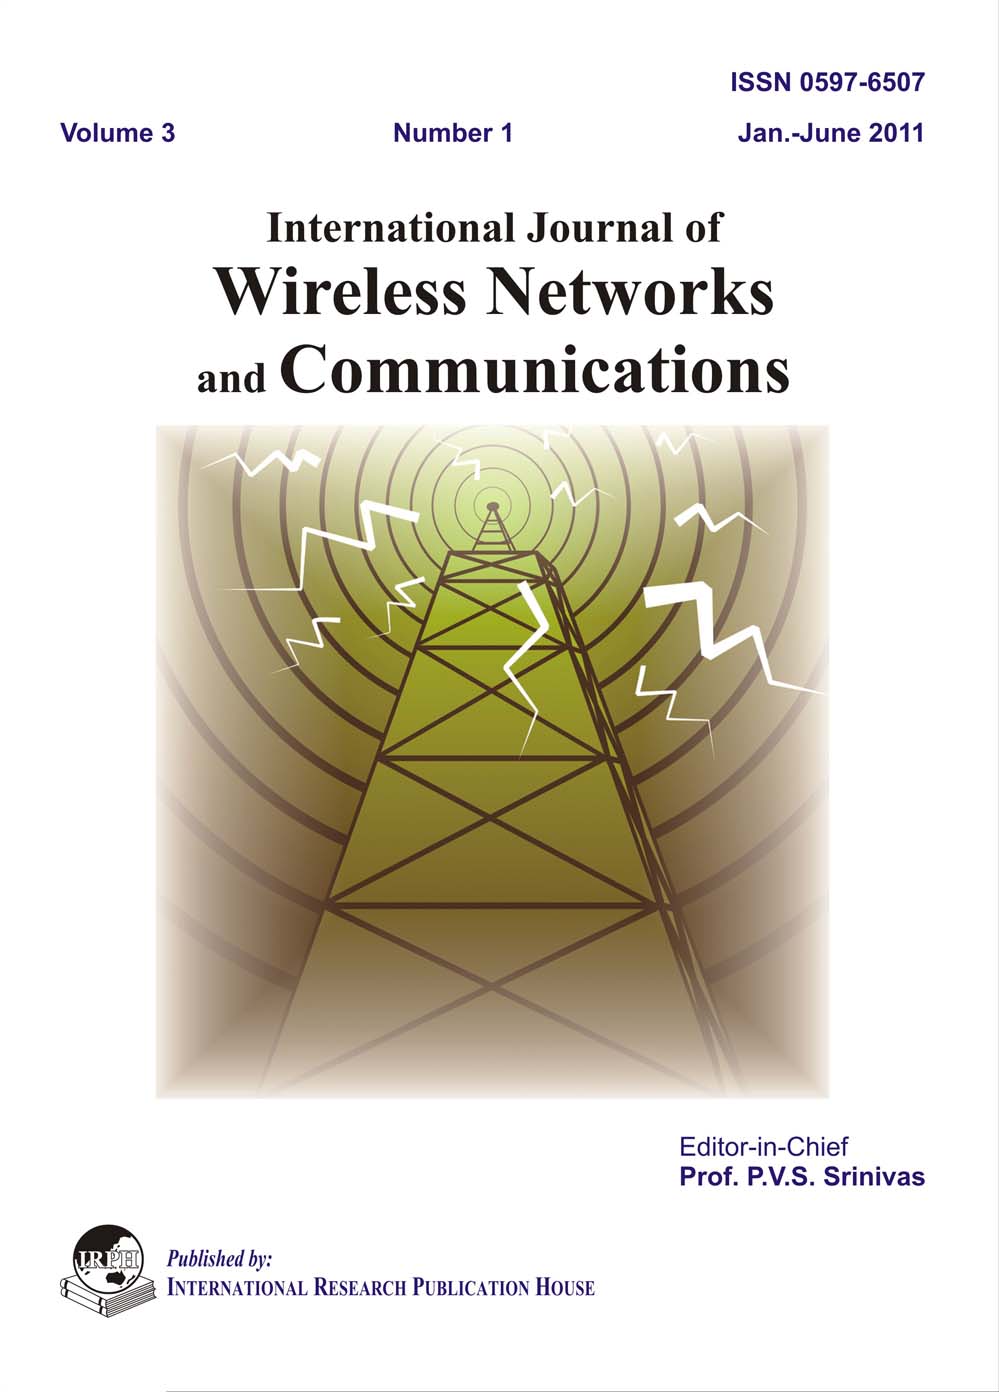 International Journal of Wireless Networks and Communications